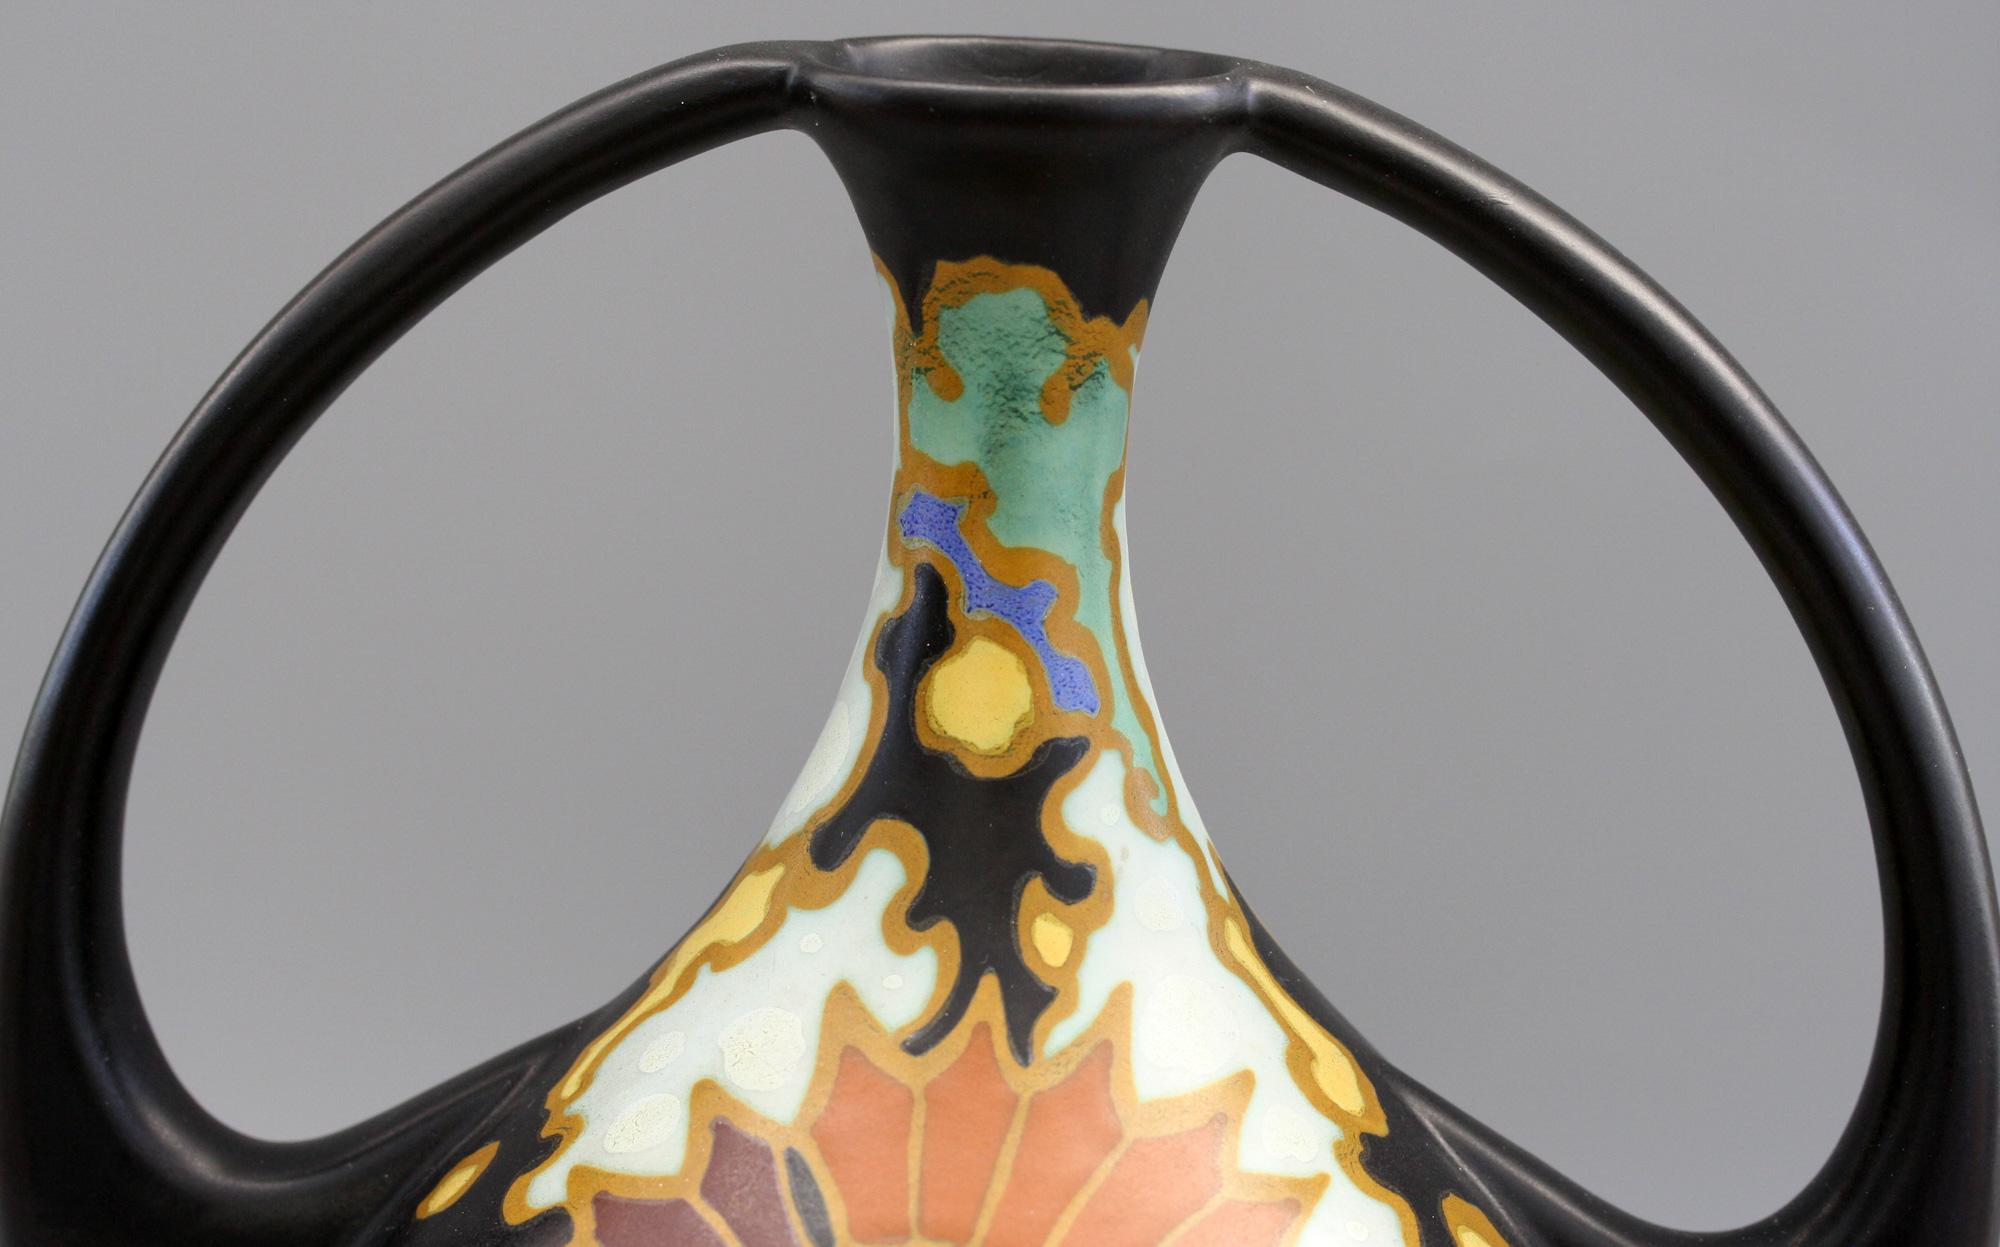 A very stylish Art Deco Dutch Regina Gouda twin handled art pottery vase decorated in the Presto pattern and designed by Steef Boers in 1927. This elegantly shaped vase has a bottle shaped body applied with prominent looped handles extending from